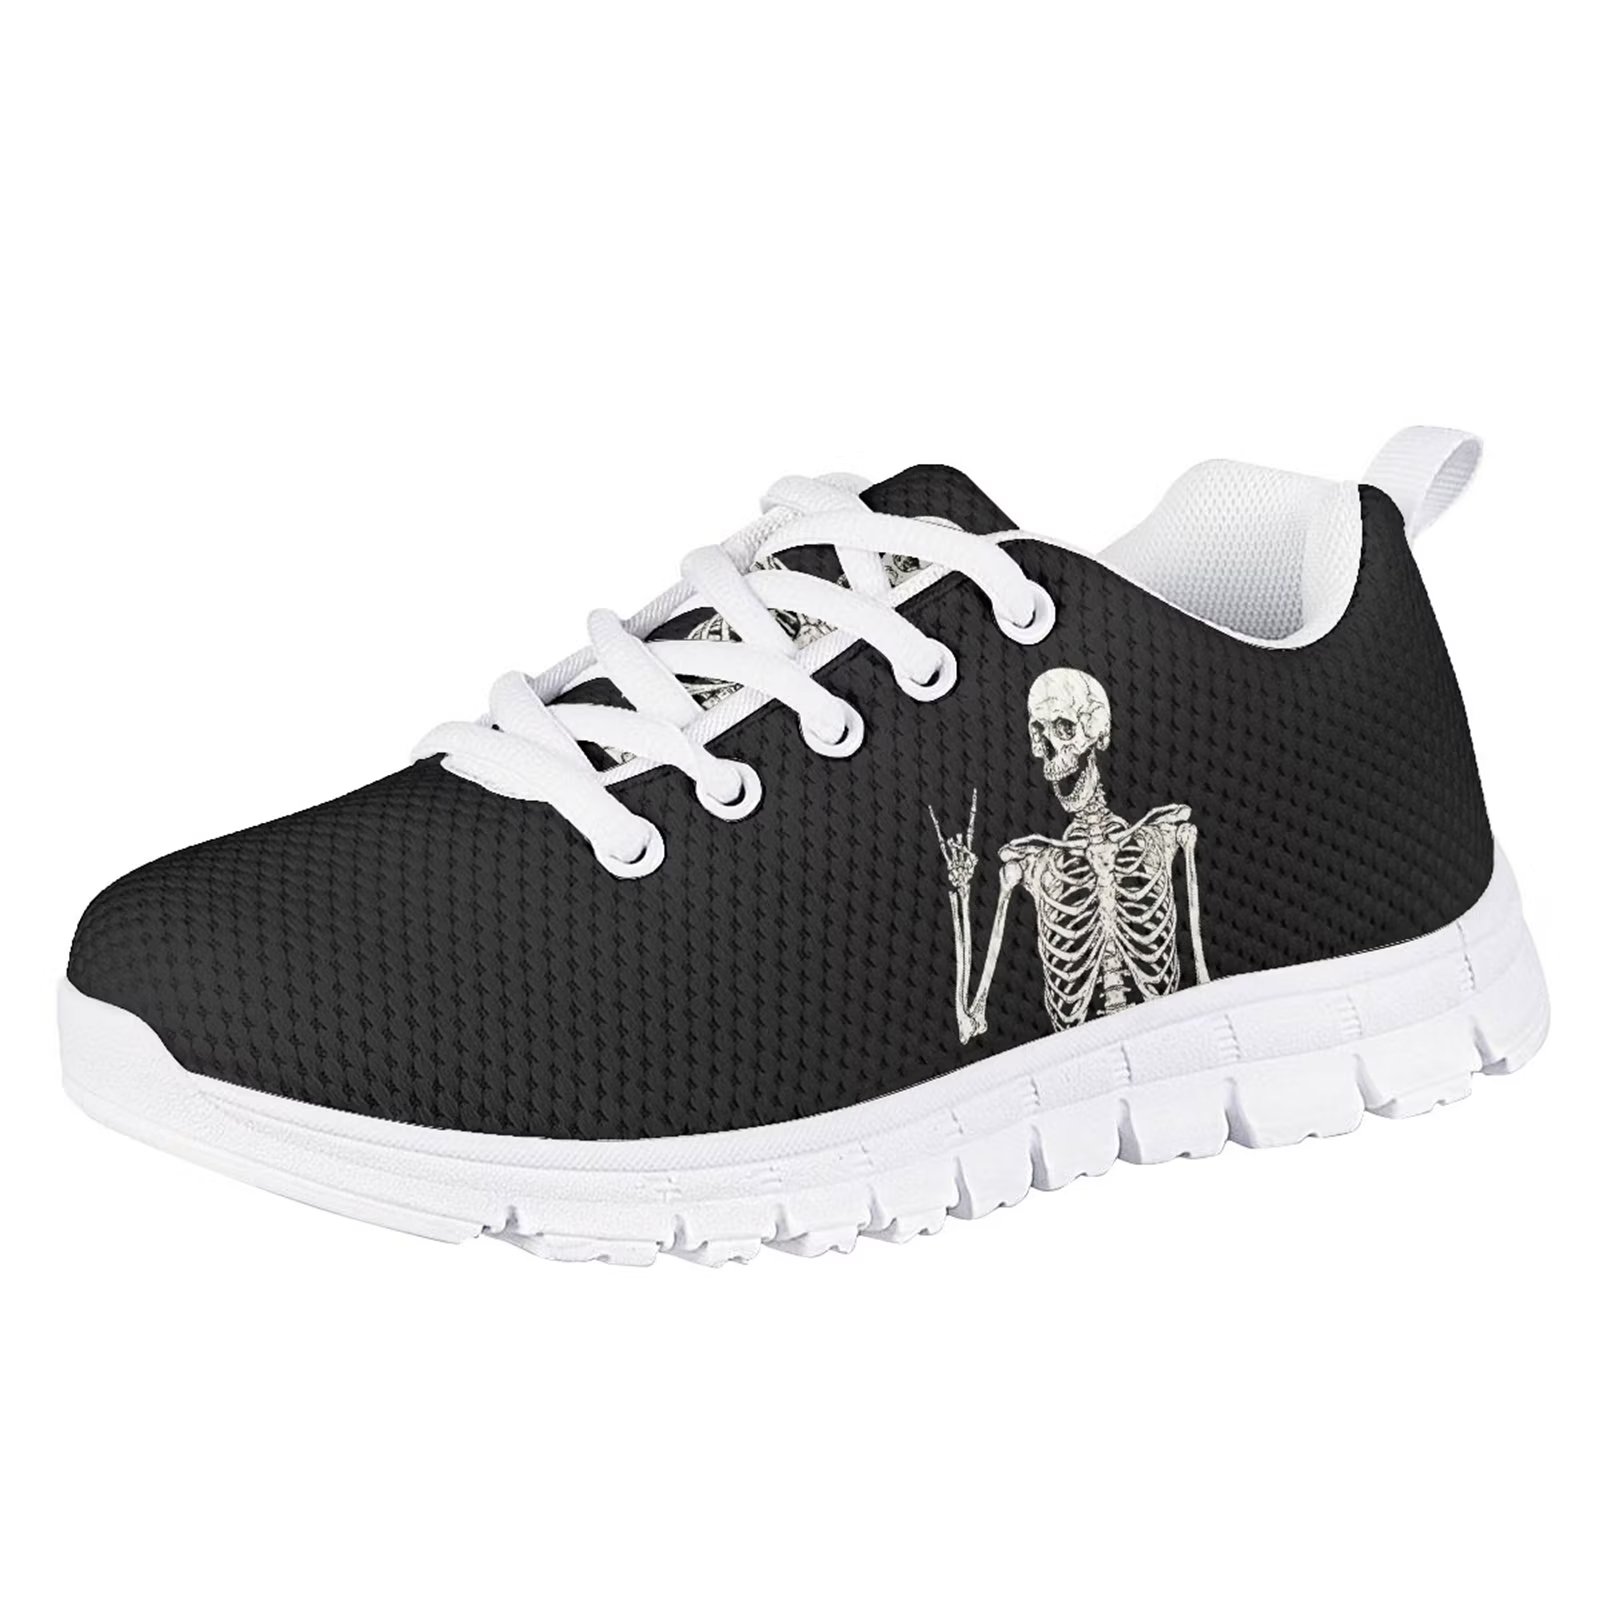 Pzuqiu Halloween Theme Skull Pattern Kids Tennis Shoes Ultralight Comfortable Child Running Shoes Halloween Gift for Kids Size 1 - image 1 of 7